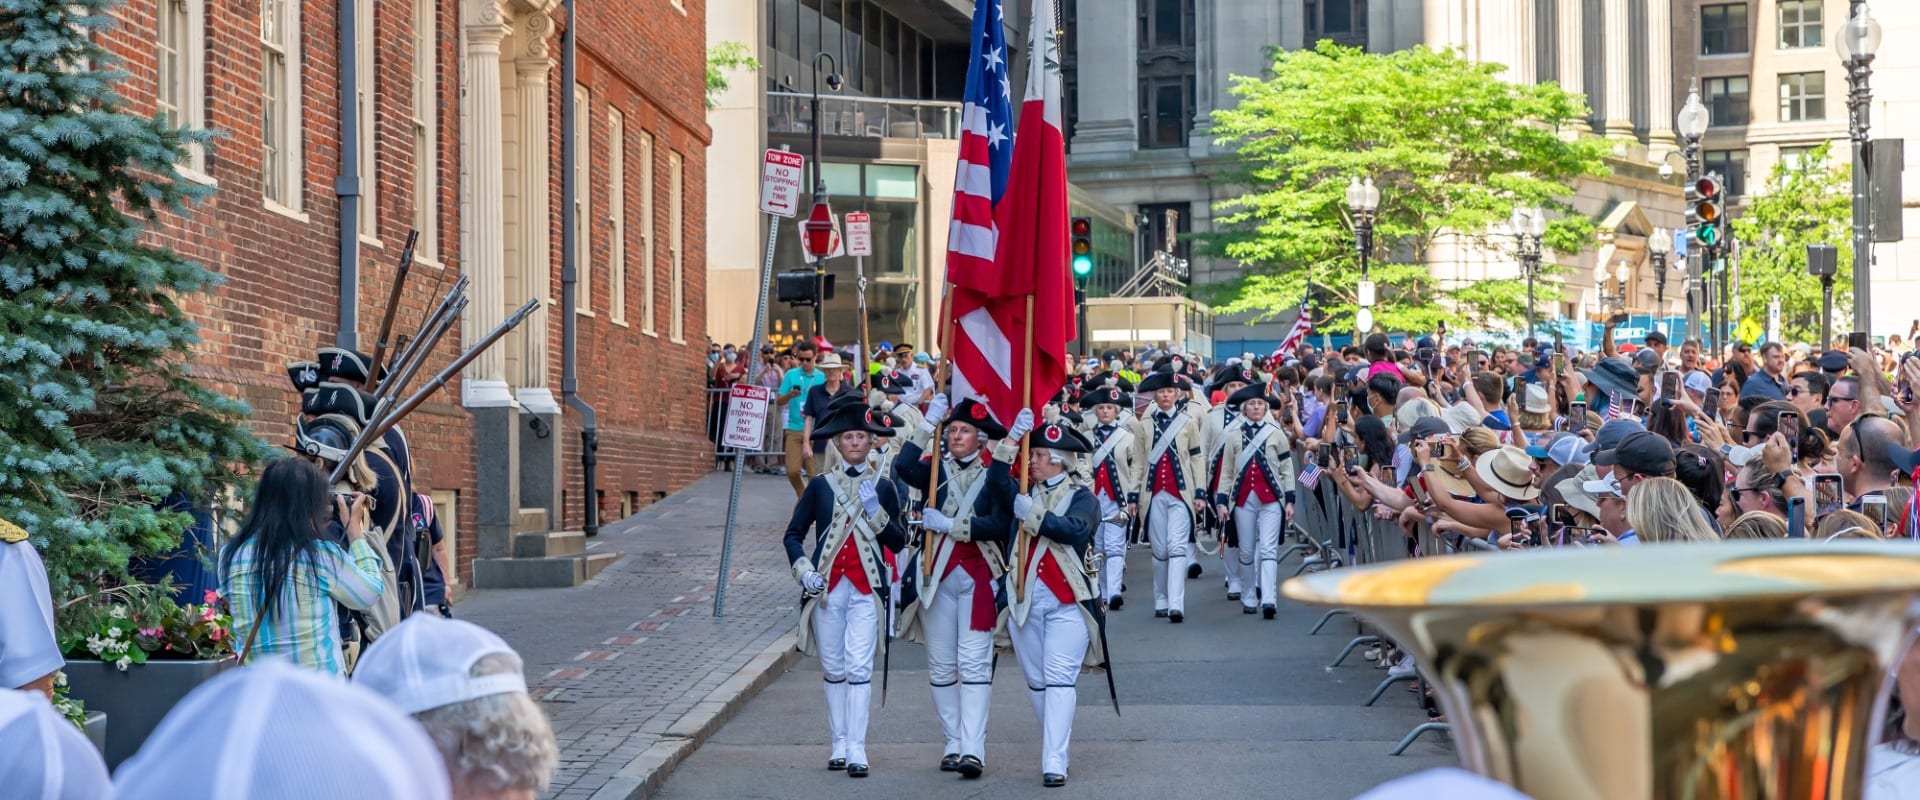 5 Things to do in Boston for 4th of July